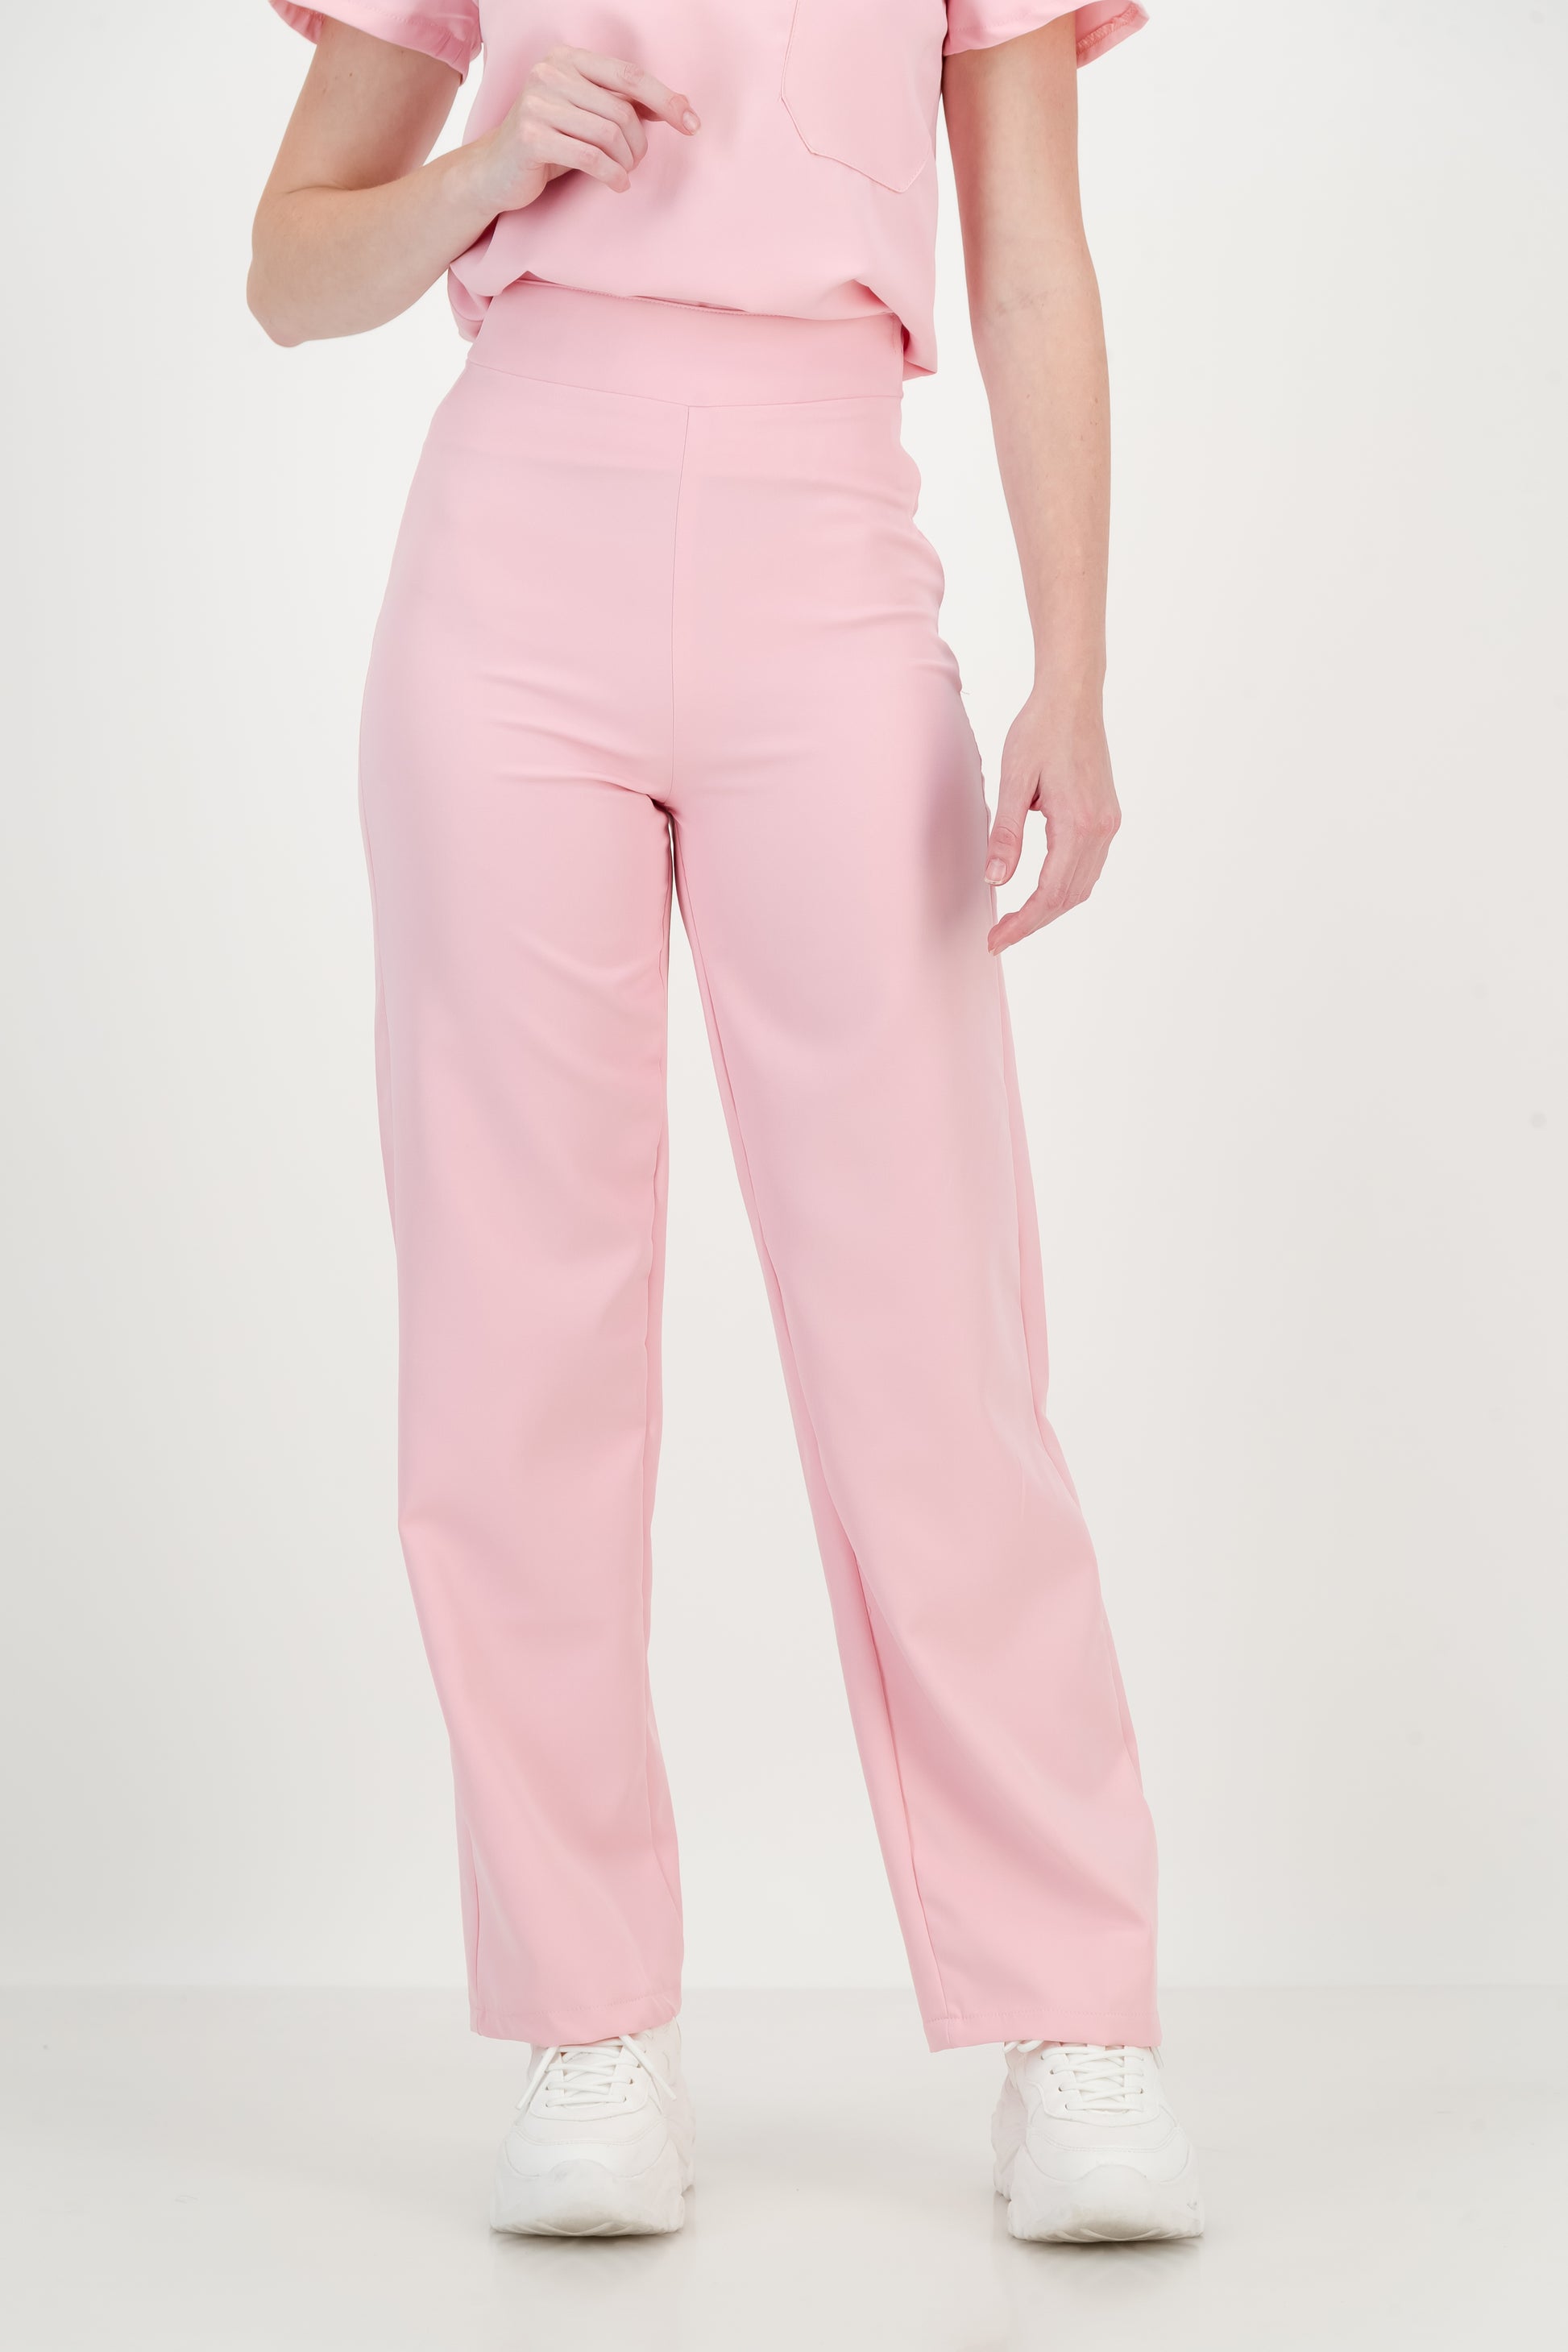 Working For It Light Pink High-Waisted Trouser Pants